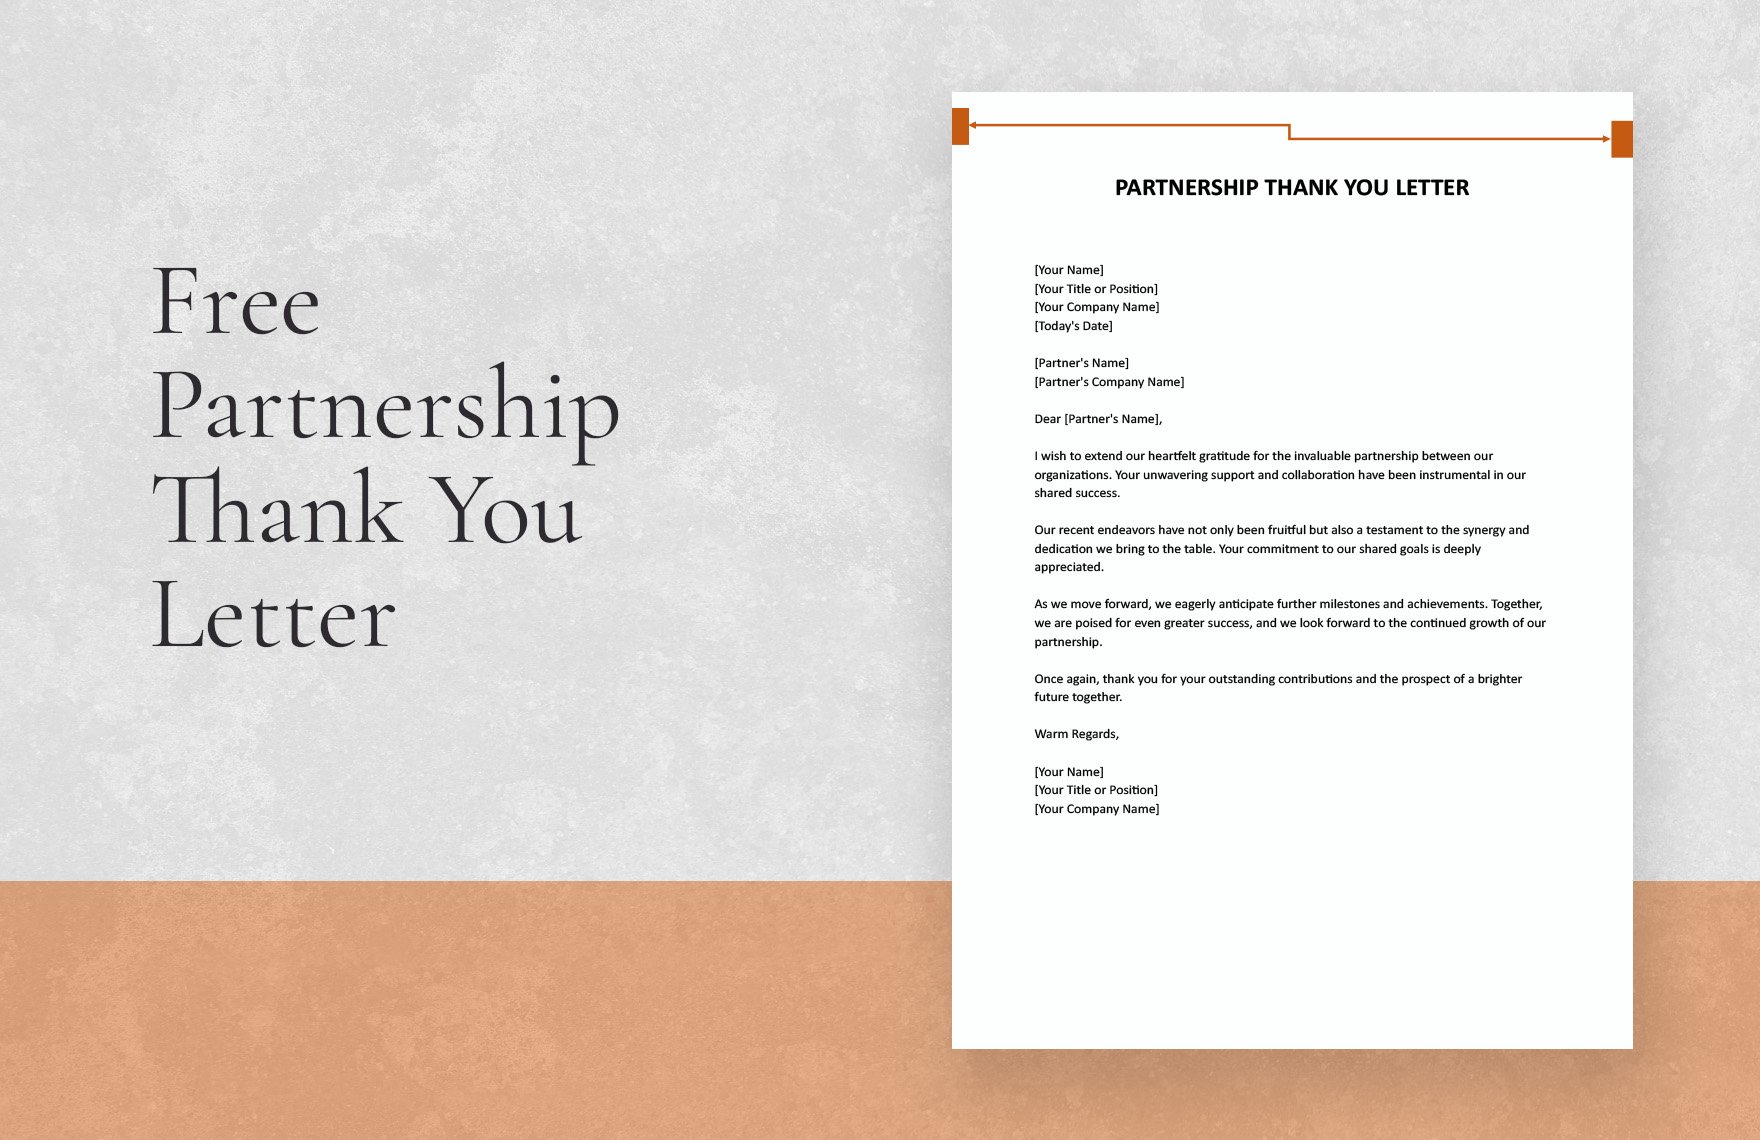 Free Partnership Thank You Letter in Word, Google Docs